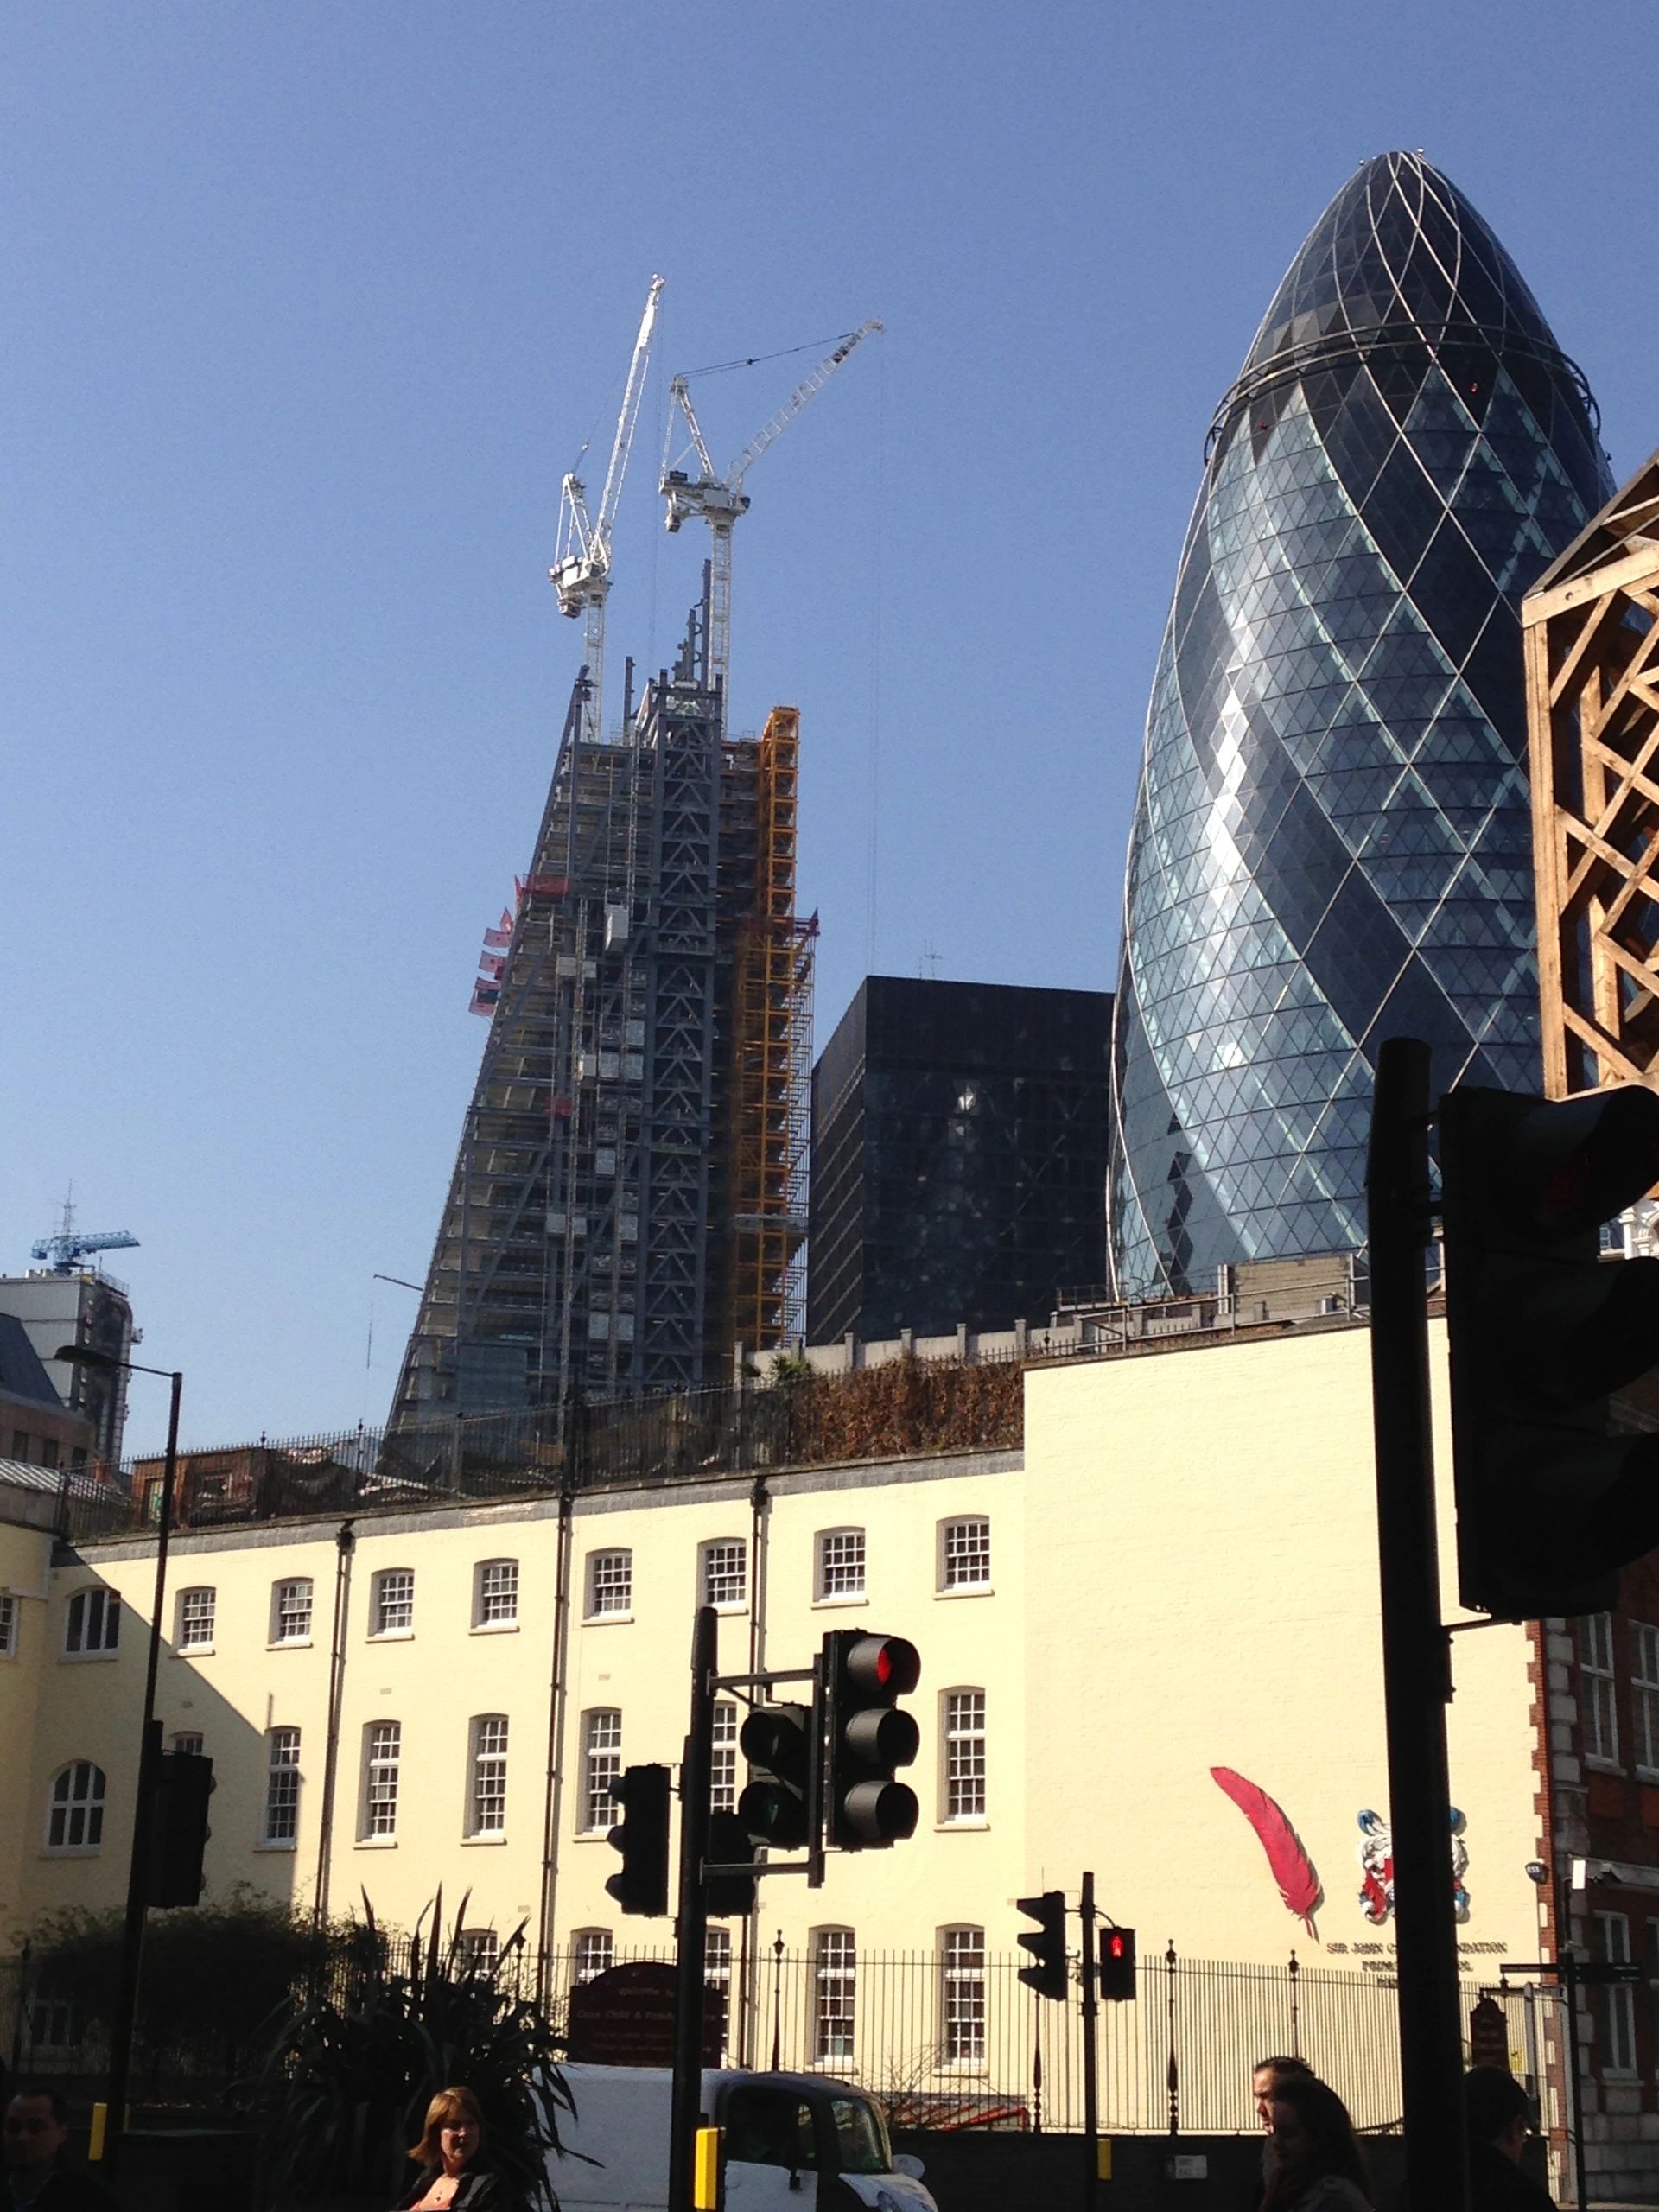 The Gherkin and the Cheese Grater